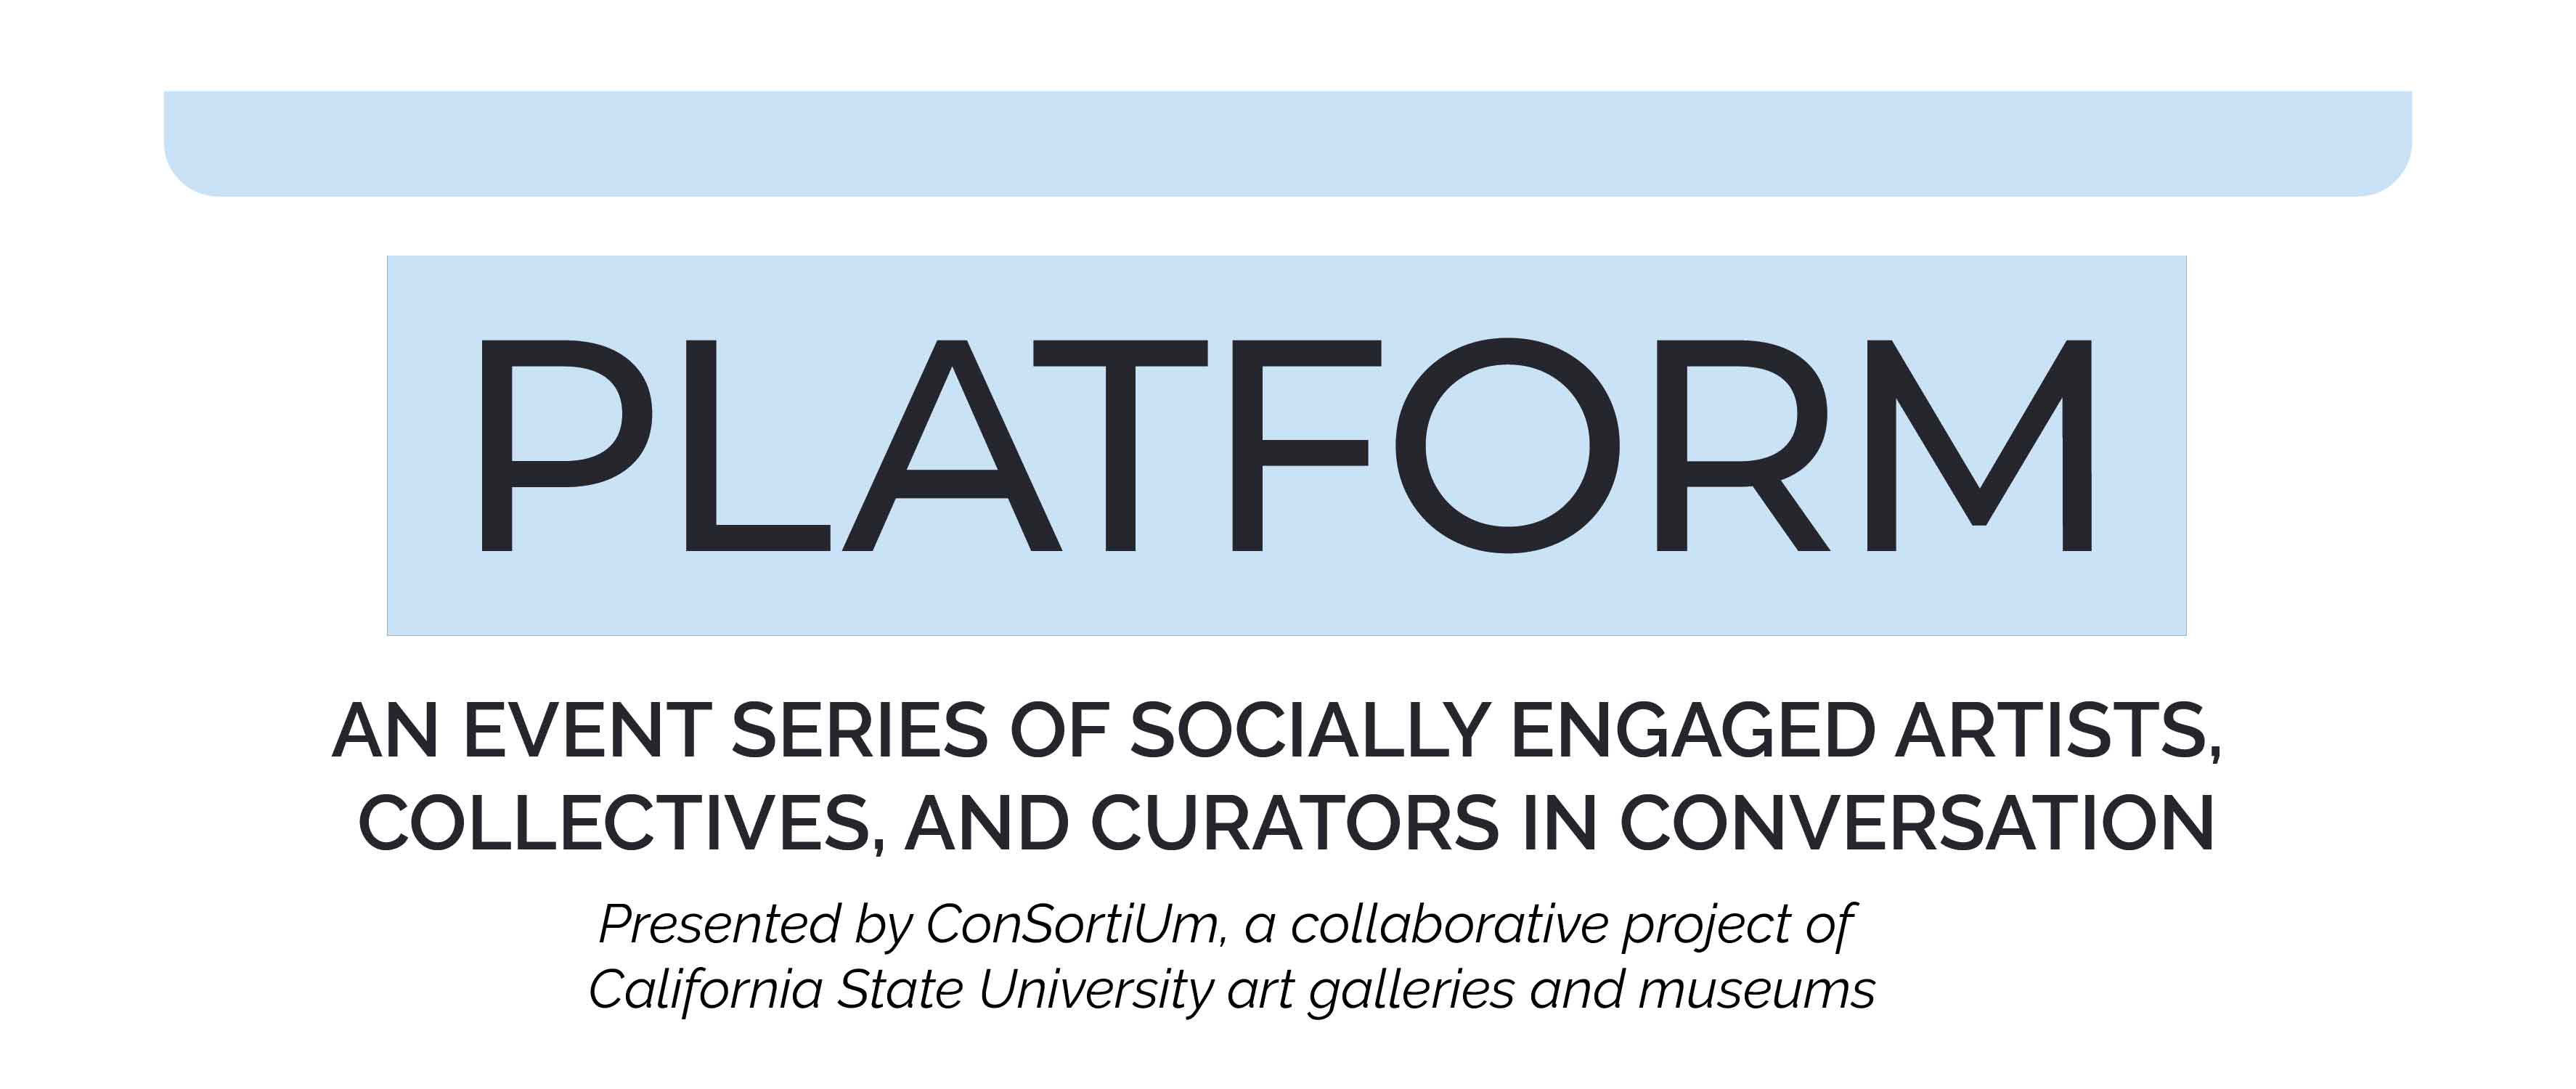 PLATFORM AN EVENT SERIES OF SOCIALLY ENGAGED ARTISTS, COLLECTIVES, AND CURATORS IN CONVERSATION Presented by ConSortiUm, a collaborative project of California State University art galleries and museums